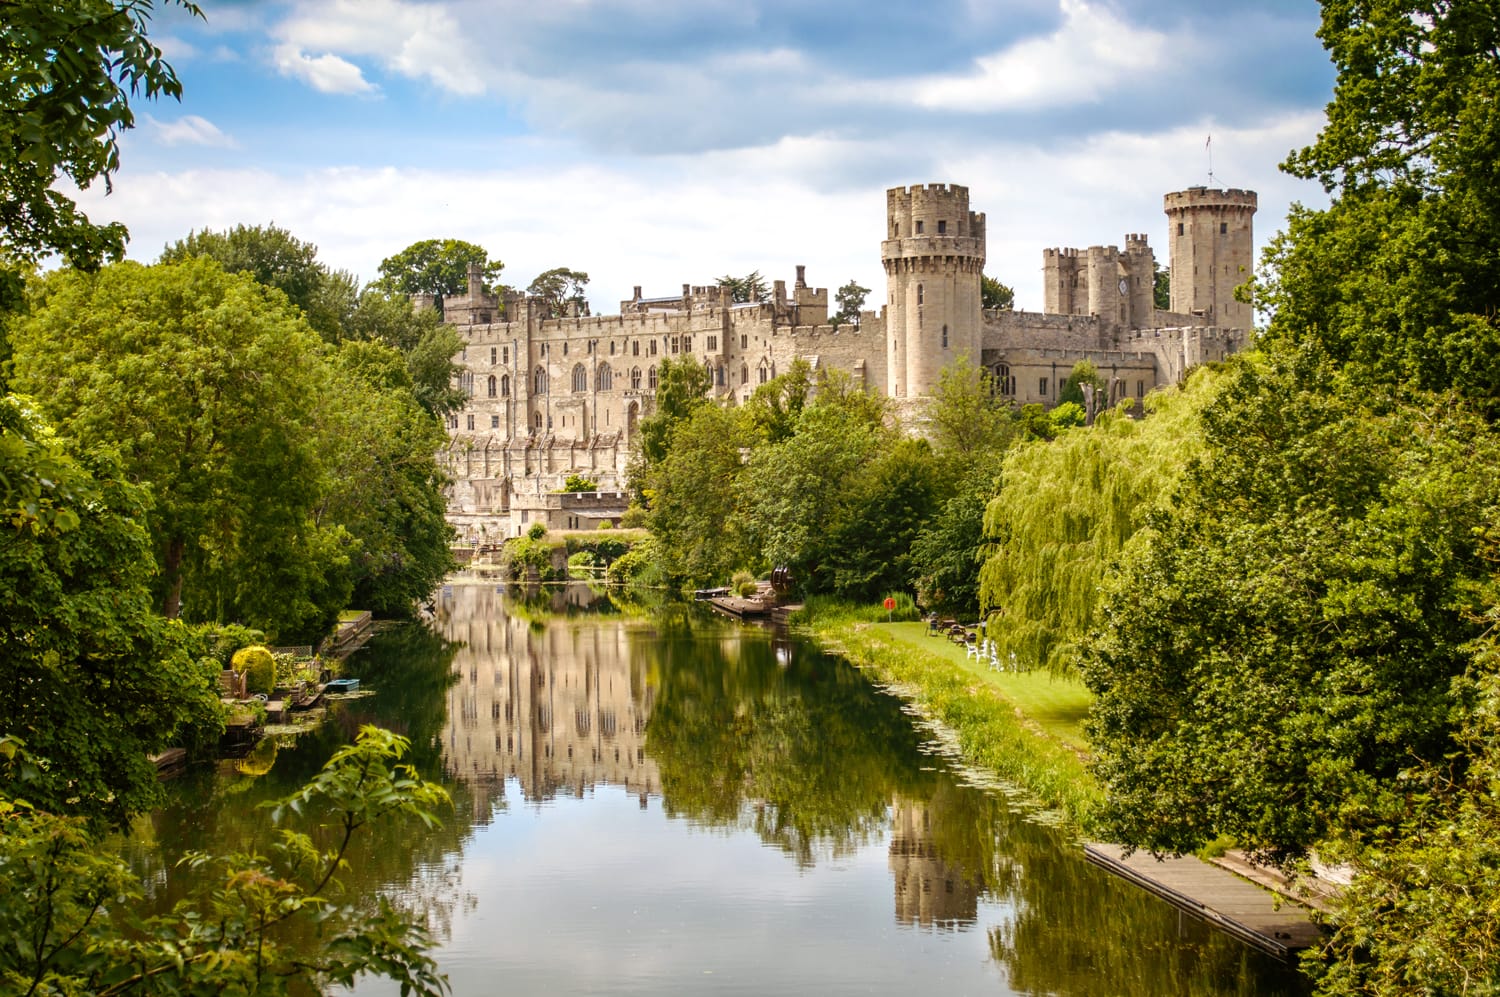 ✈️ How Many of the 20 Best Countries for Tourists Have You Visited? Warwick Castle, England, United Kingdom